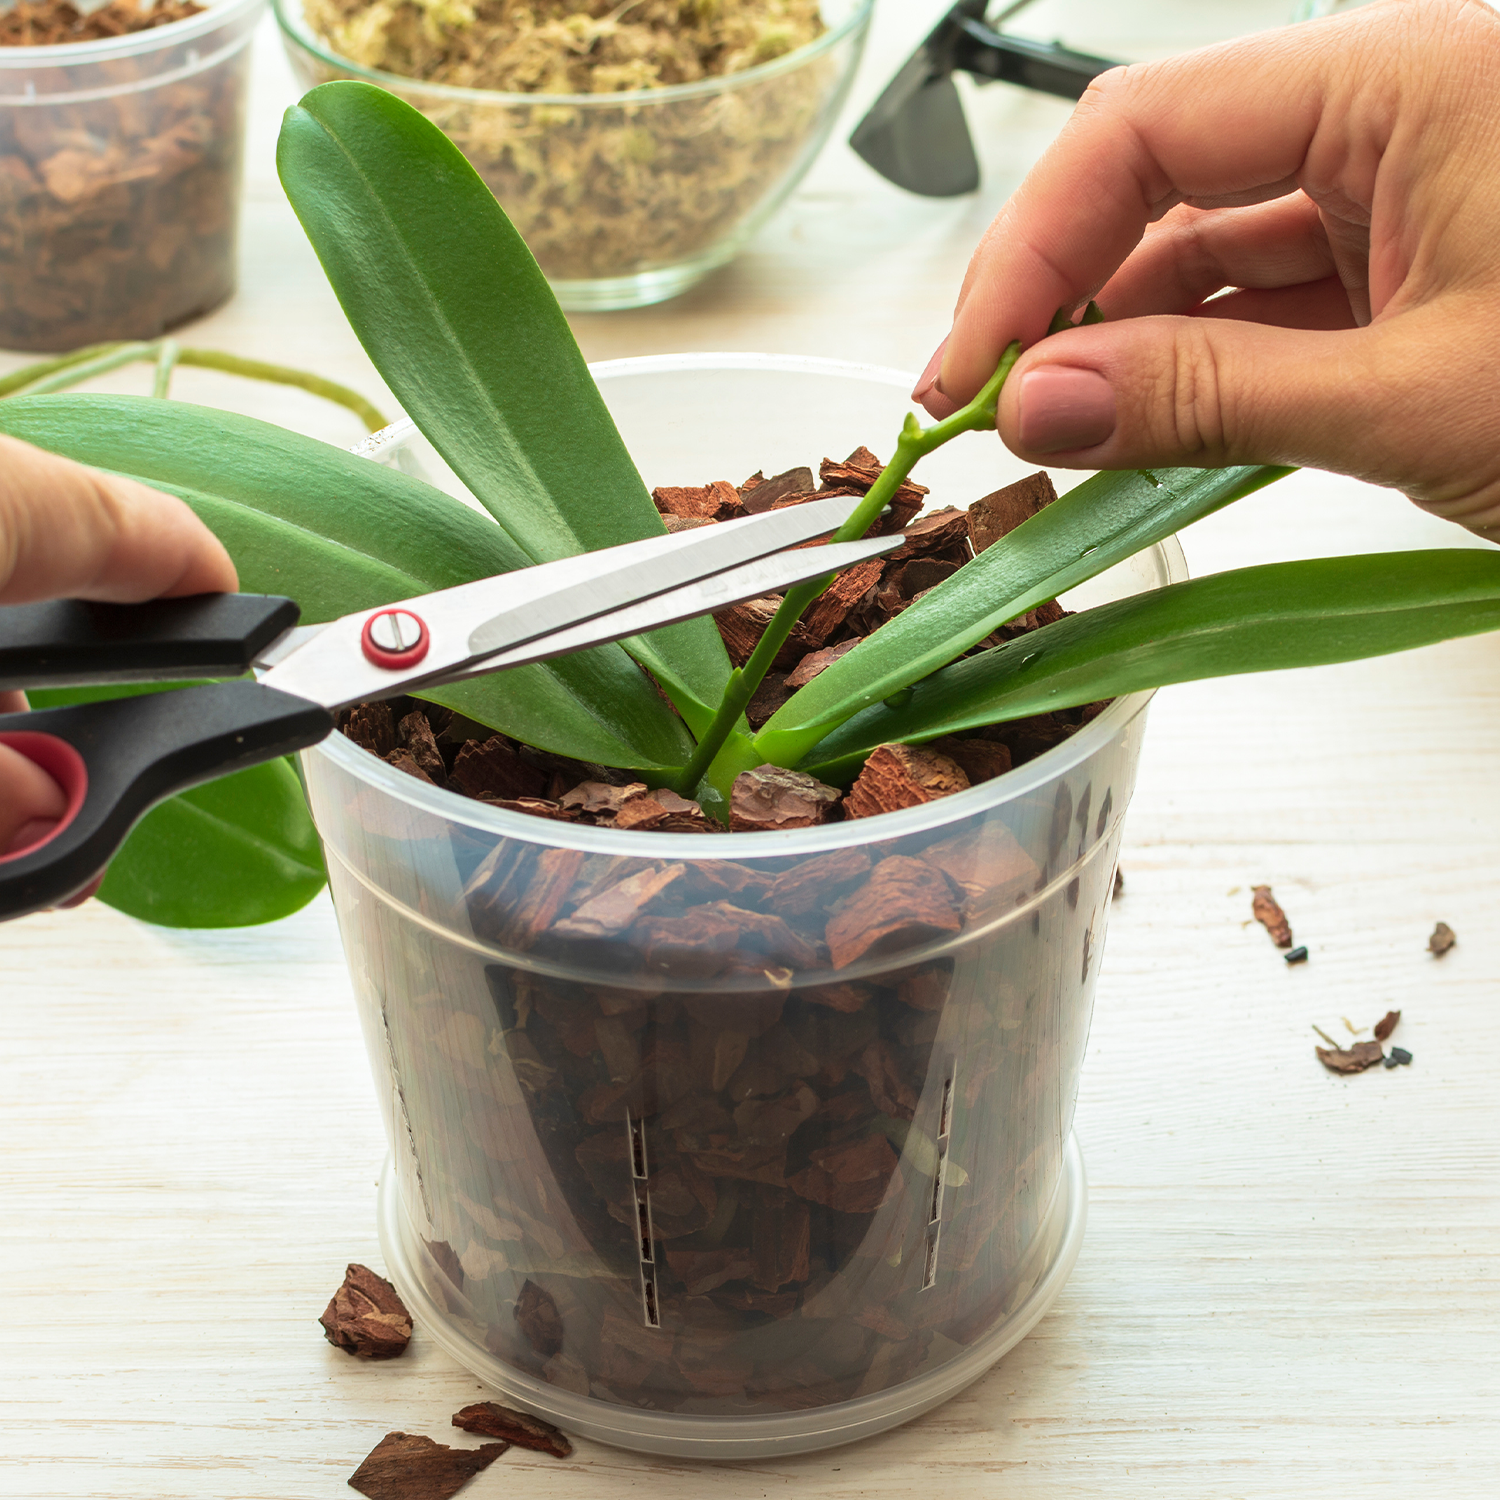 A Complete Guide to Orchid Care for Beginners